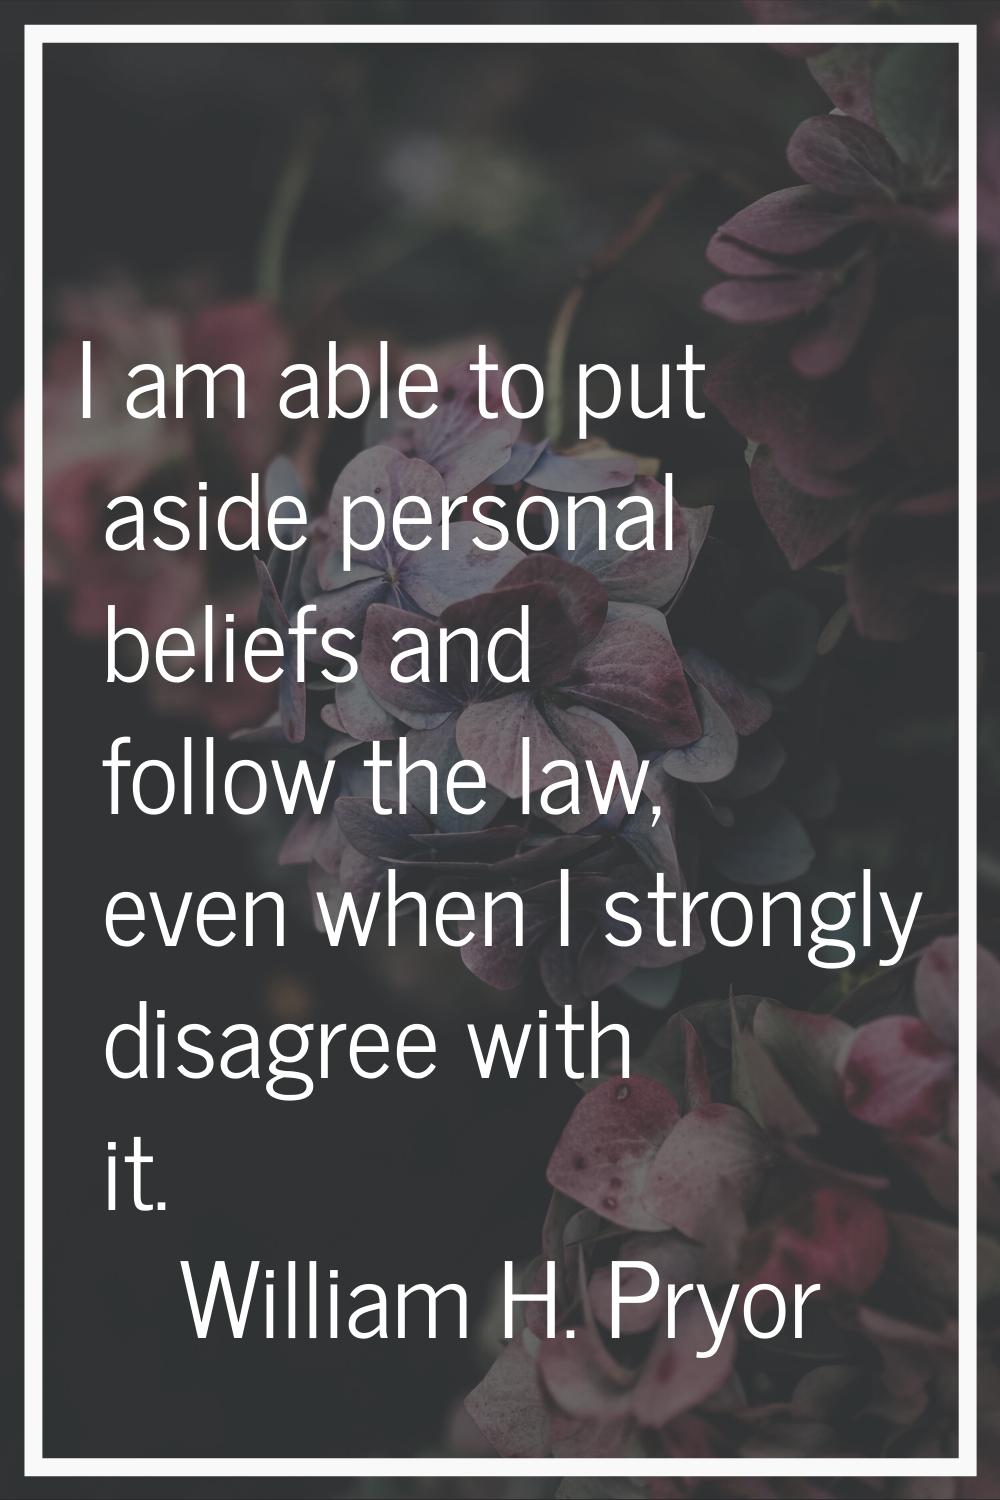 I am able to put aside personal beliefs and follow the law, even when I strongly disagree with it.